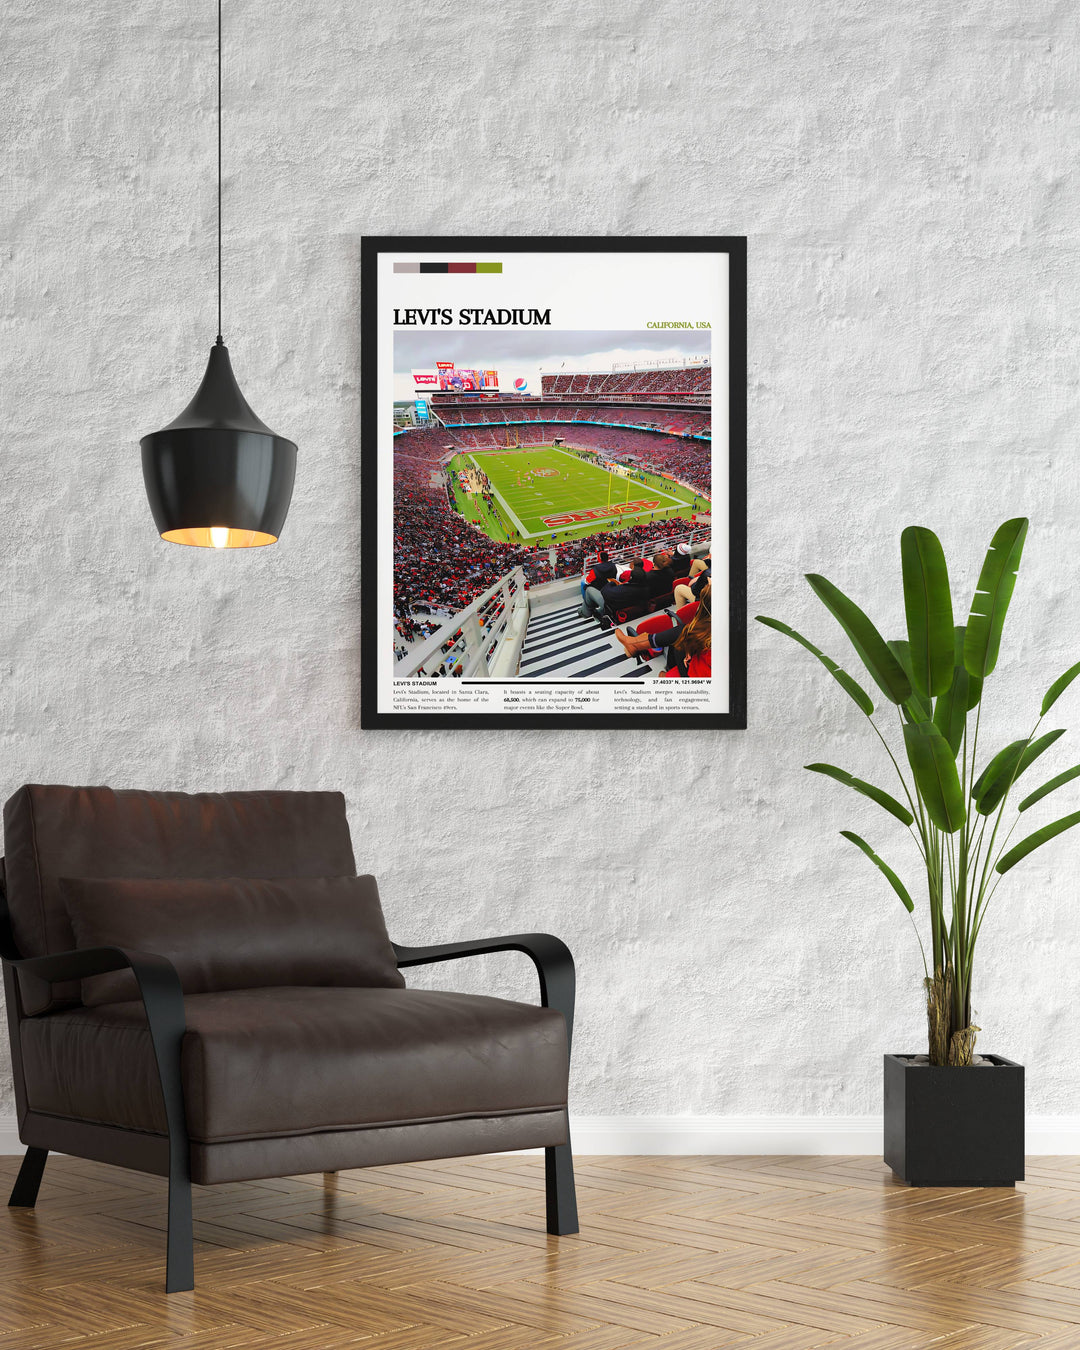 Impressive NFL Stadium Poster of Levi Stadium, ideal for transforming any space into a San Francisco 49ers fan zone, showcasing the stadium's architecture and fan-filled stands.